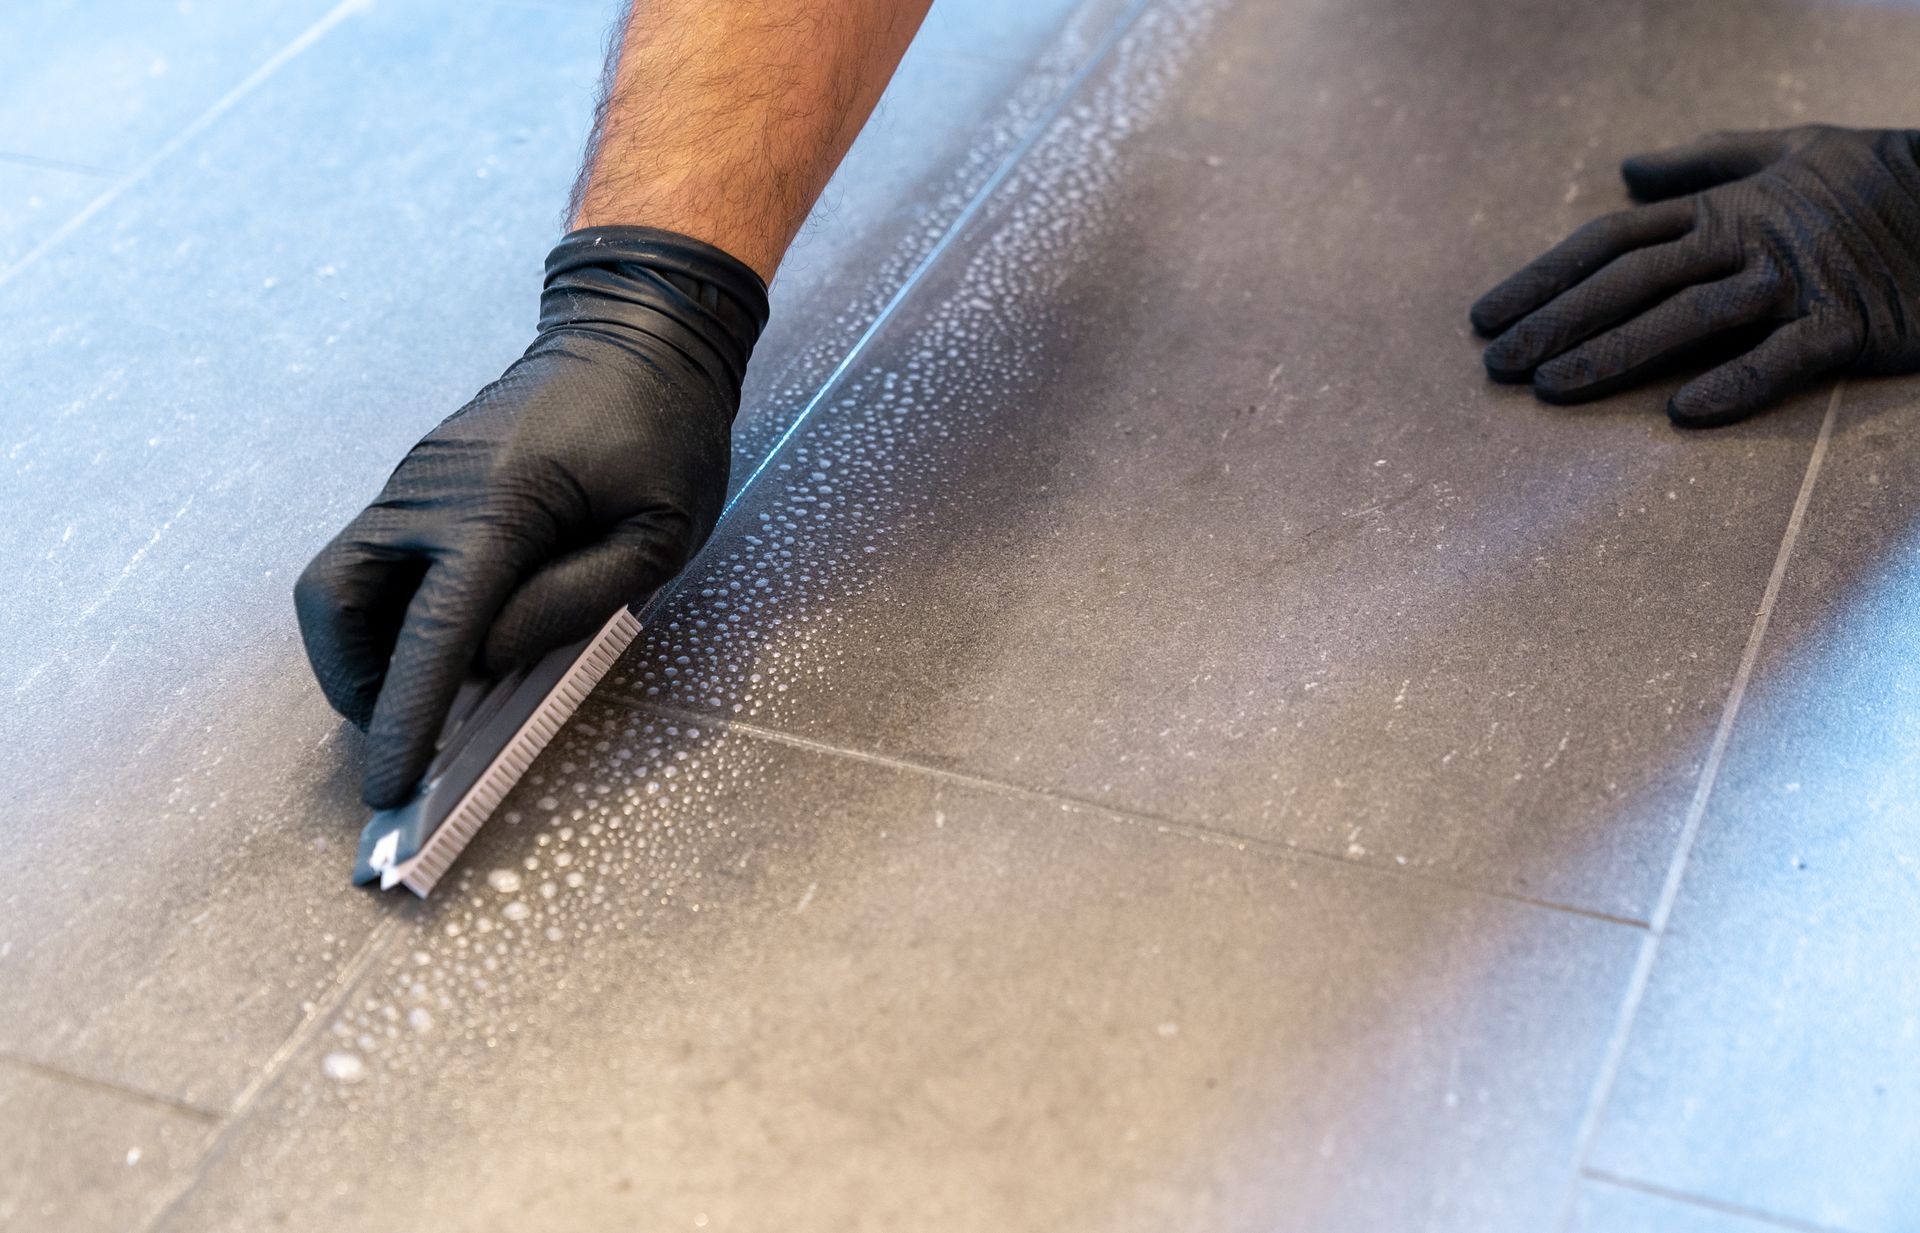 Professional cleaner meticulously scrubbing grout lines with a specialized brush and foamy soap on a sleek gray tiled bathroom floor.